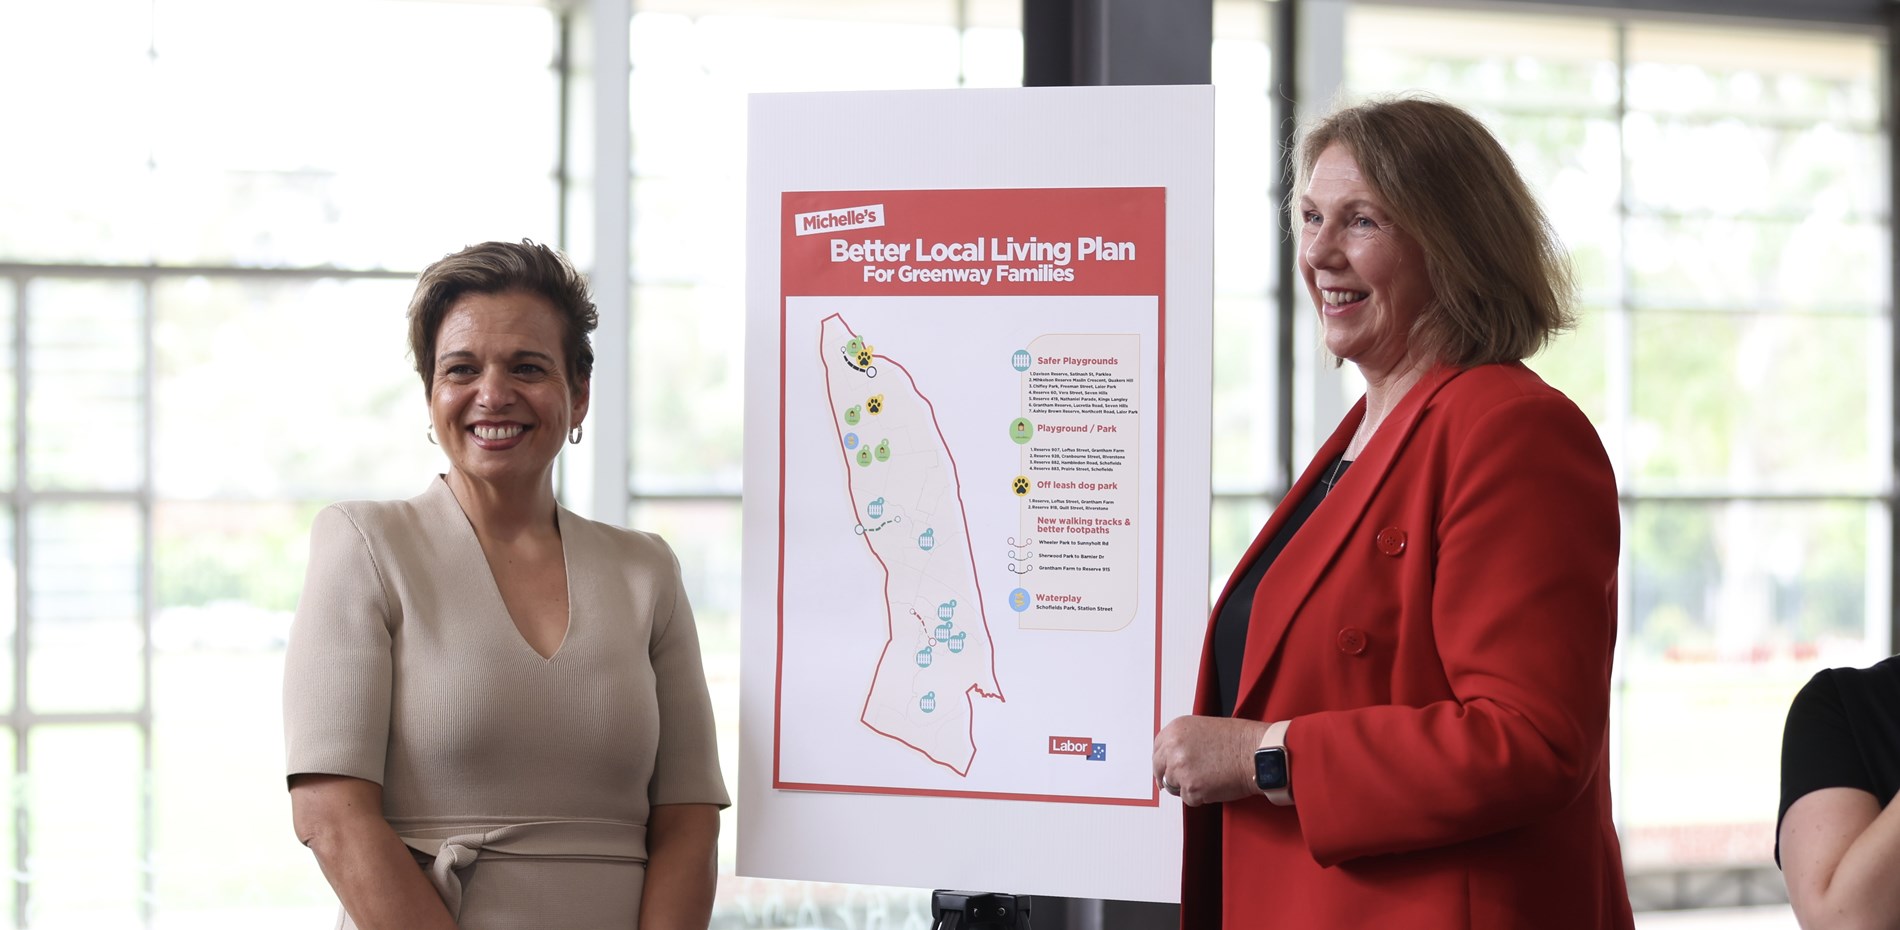 Michelle's Plan For Better Local Living in Greenway Main Image